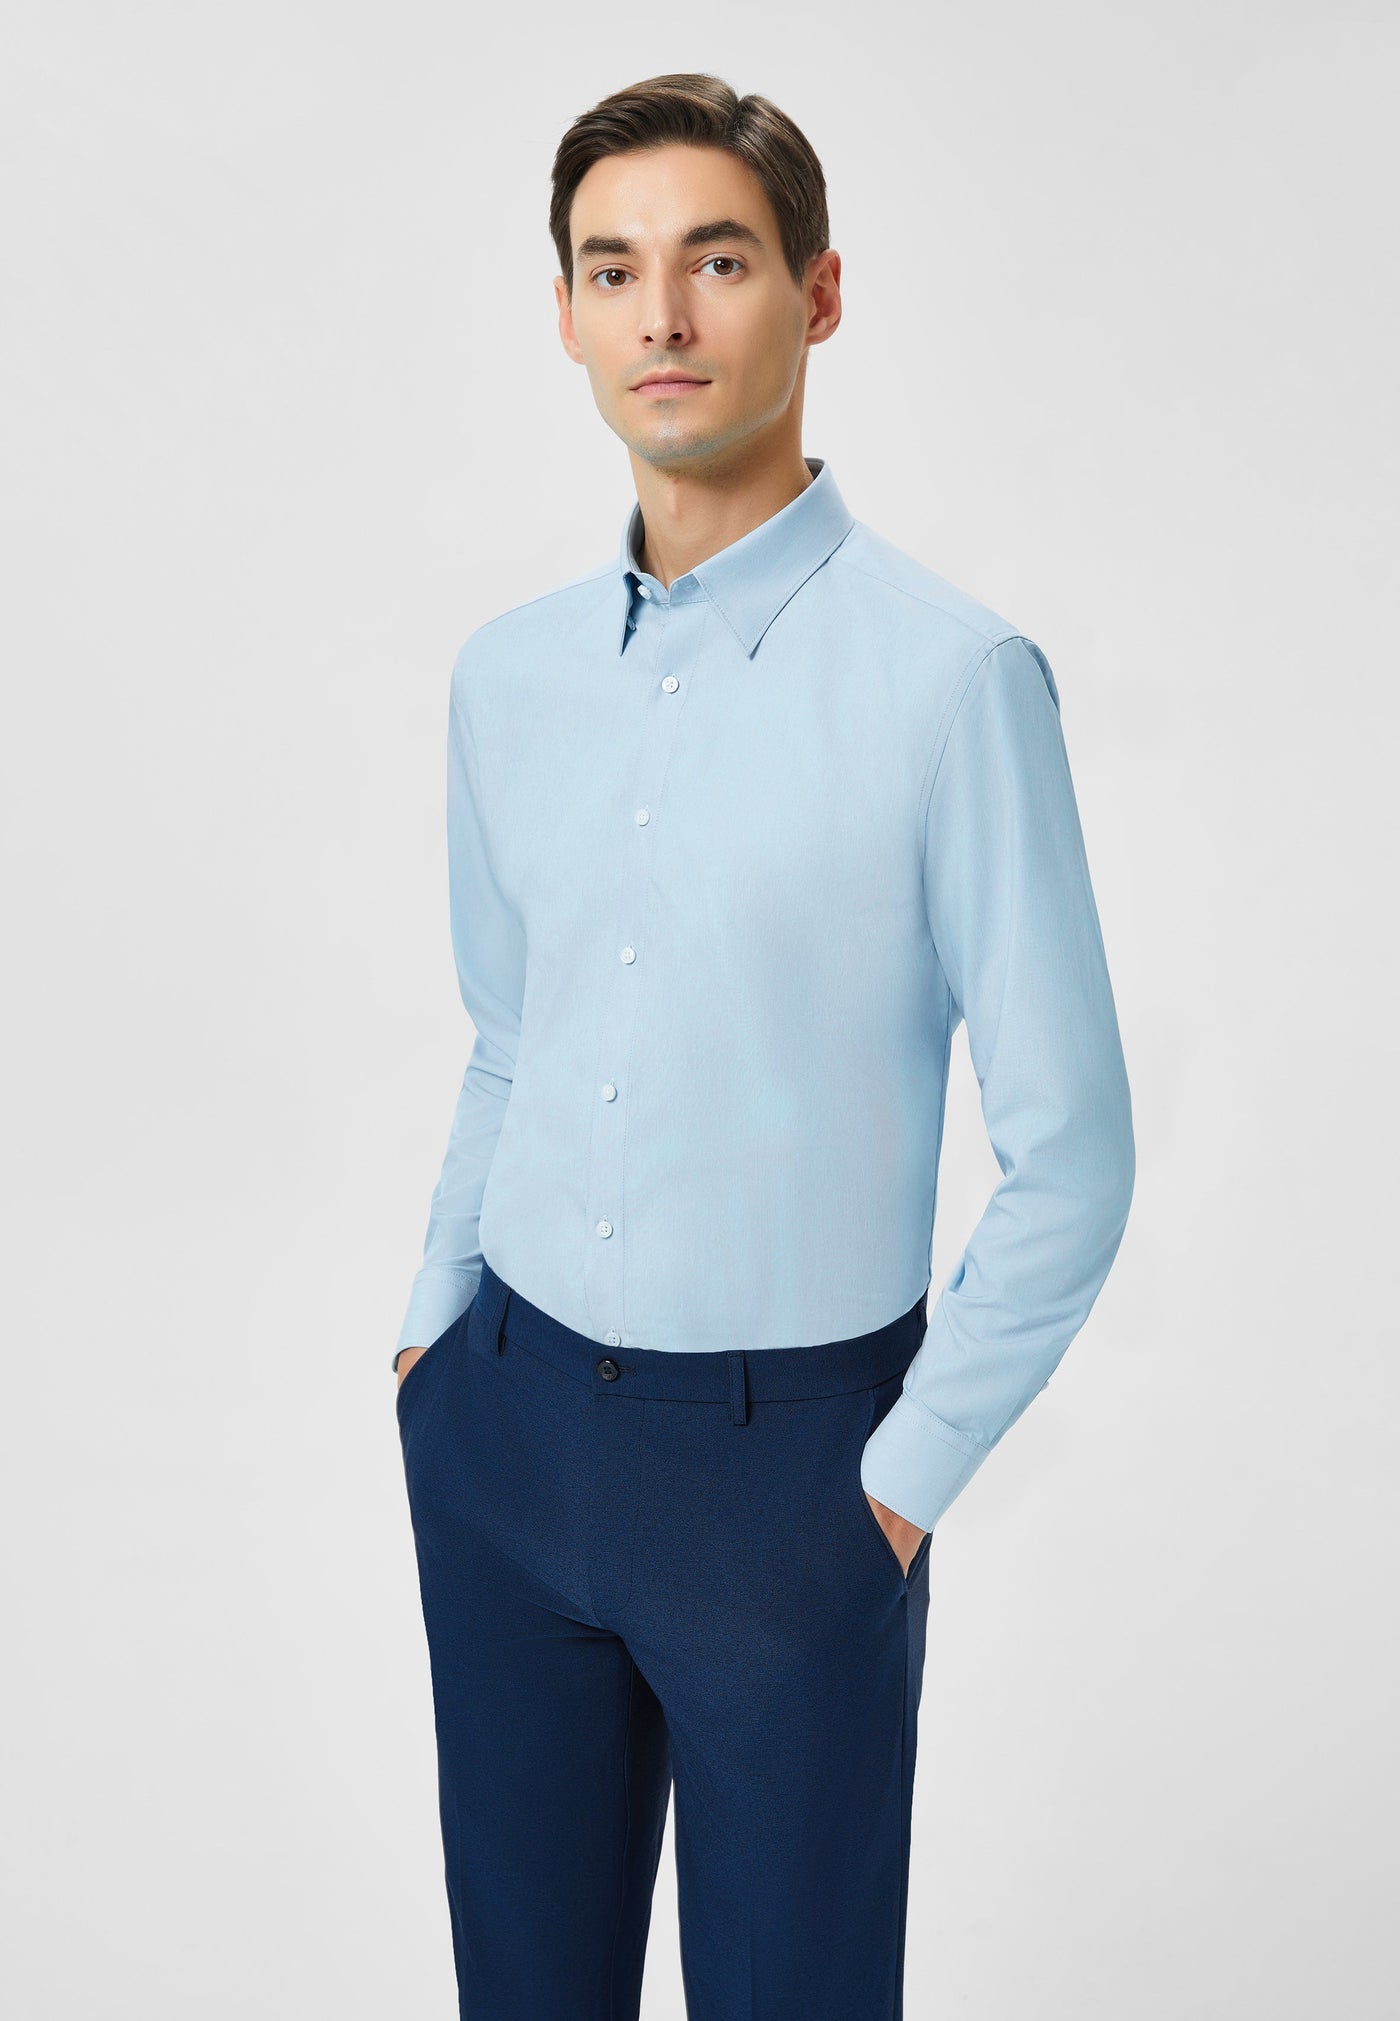 Mendryden - Dry & Sweatwicking Non-Iron Formal Shirt Smart Fit – G2000  Thailand